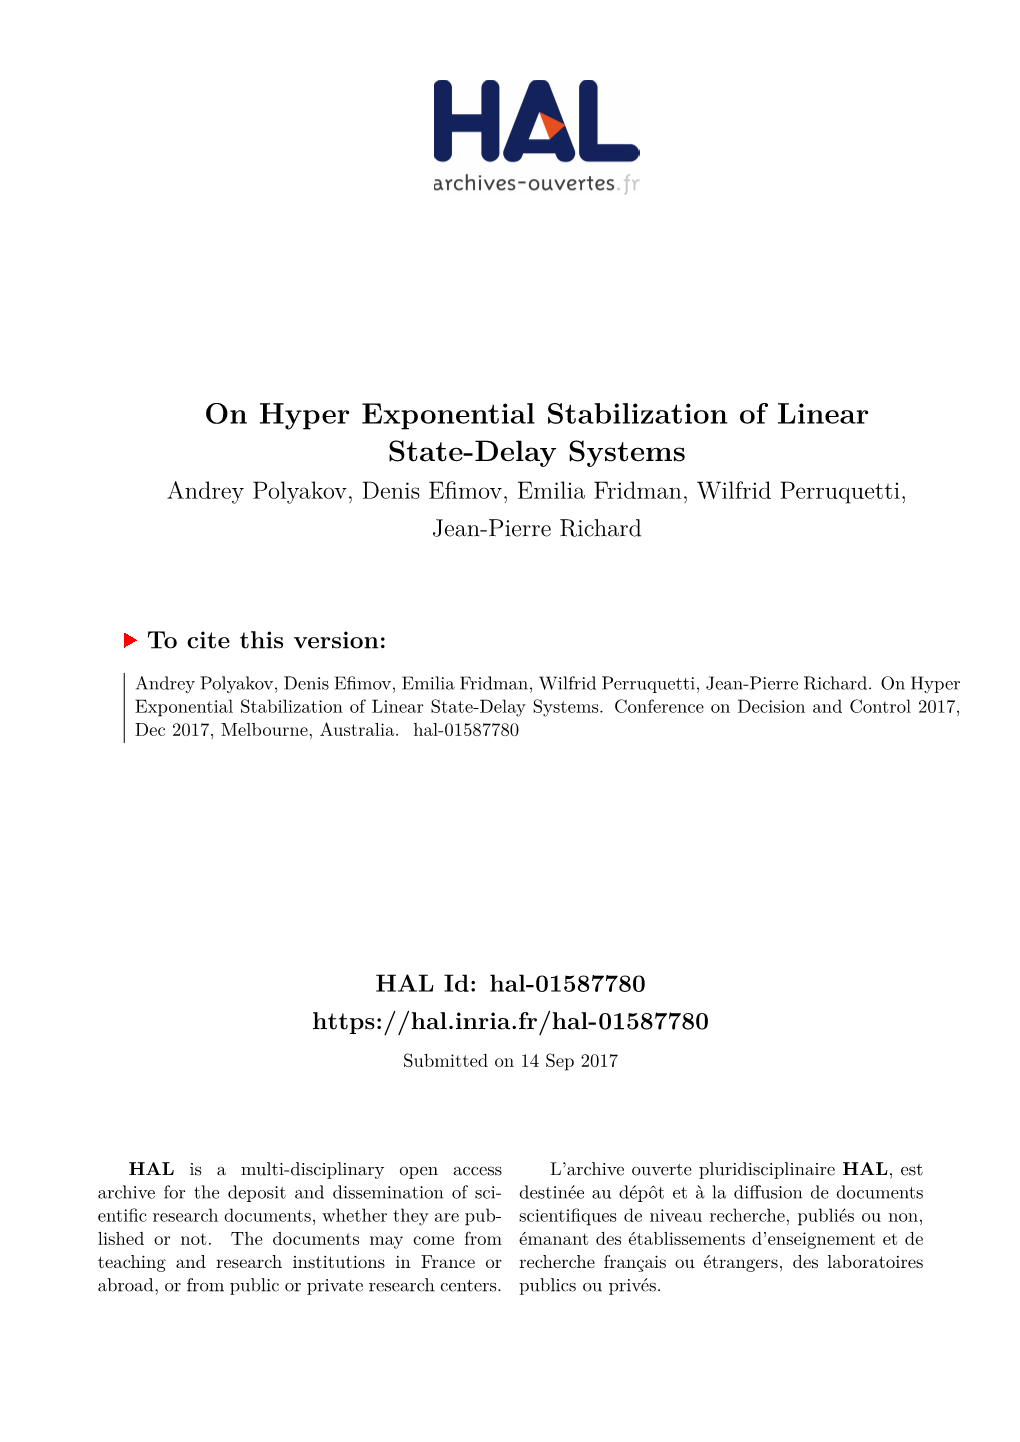 On Hyper Exponential Stabilization of Linear State-Delay Systems Andrey Polyakov, Denis Efimov, Emilia Fridman, Wilfrid Perruquetti, Jean-Pierre Richard